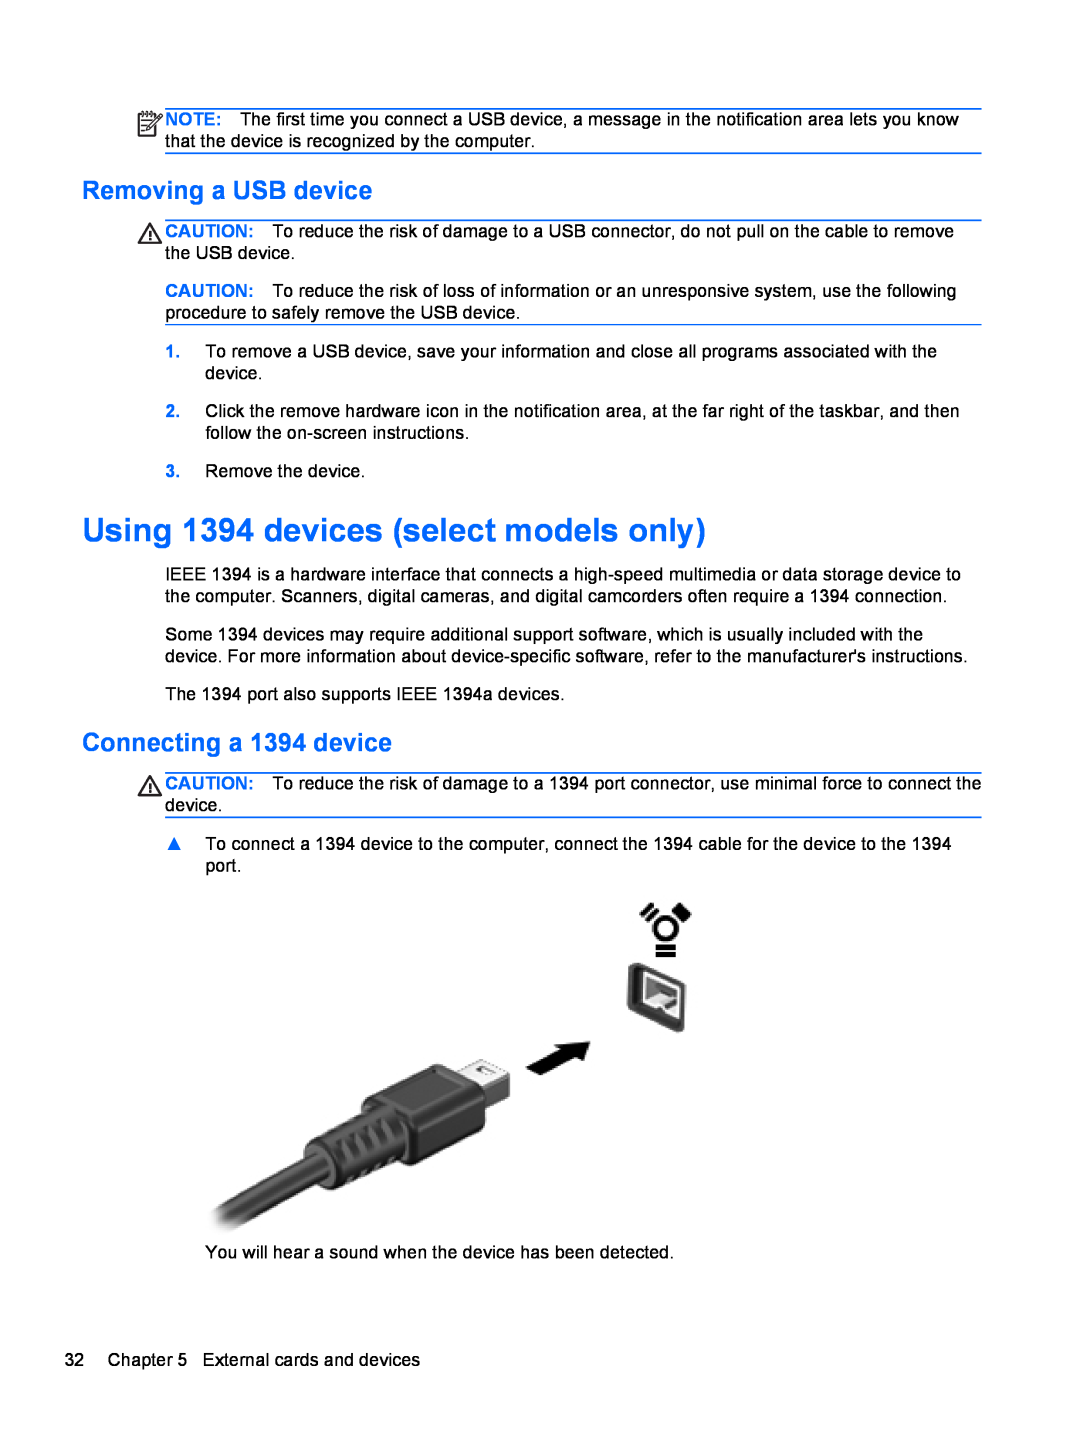 HP CQ57-310US, CQ57-439WM manual Using 1394 devices select models only, Removing a USB device, Connecting a 1394 device 